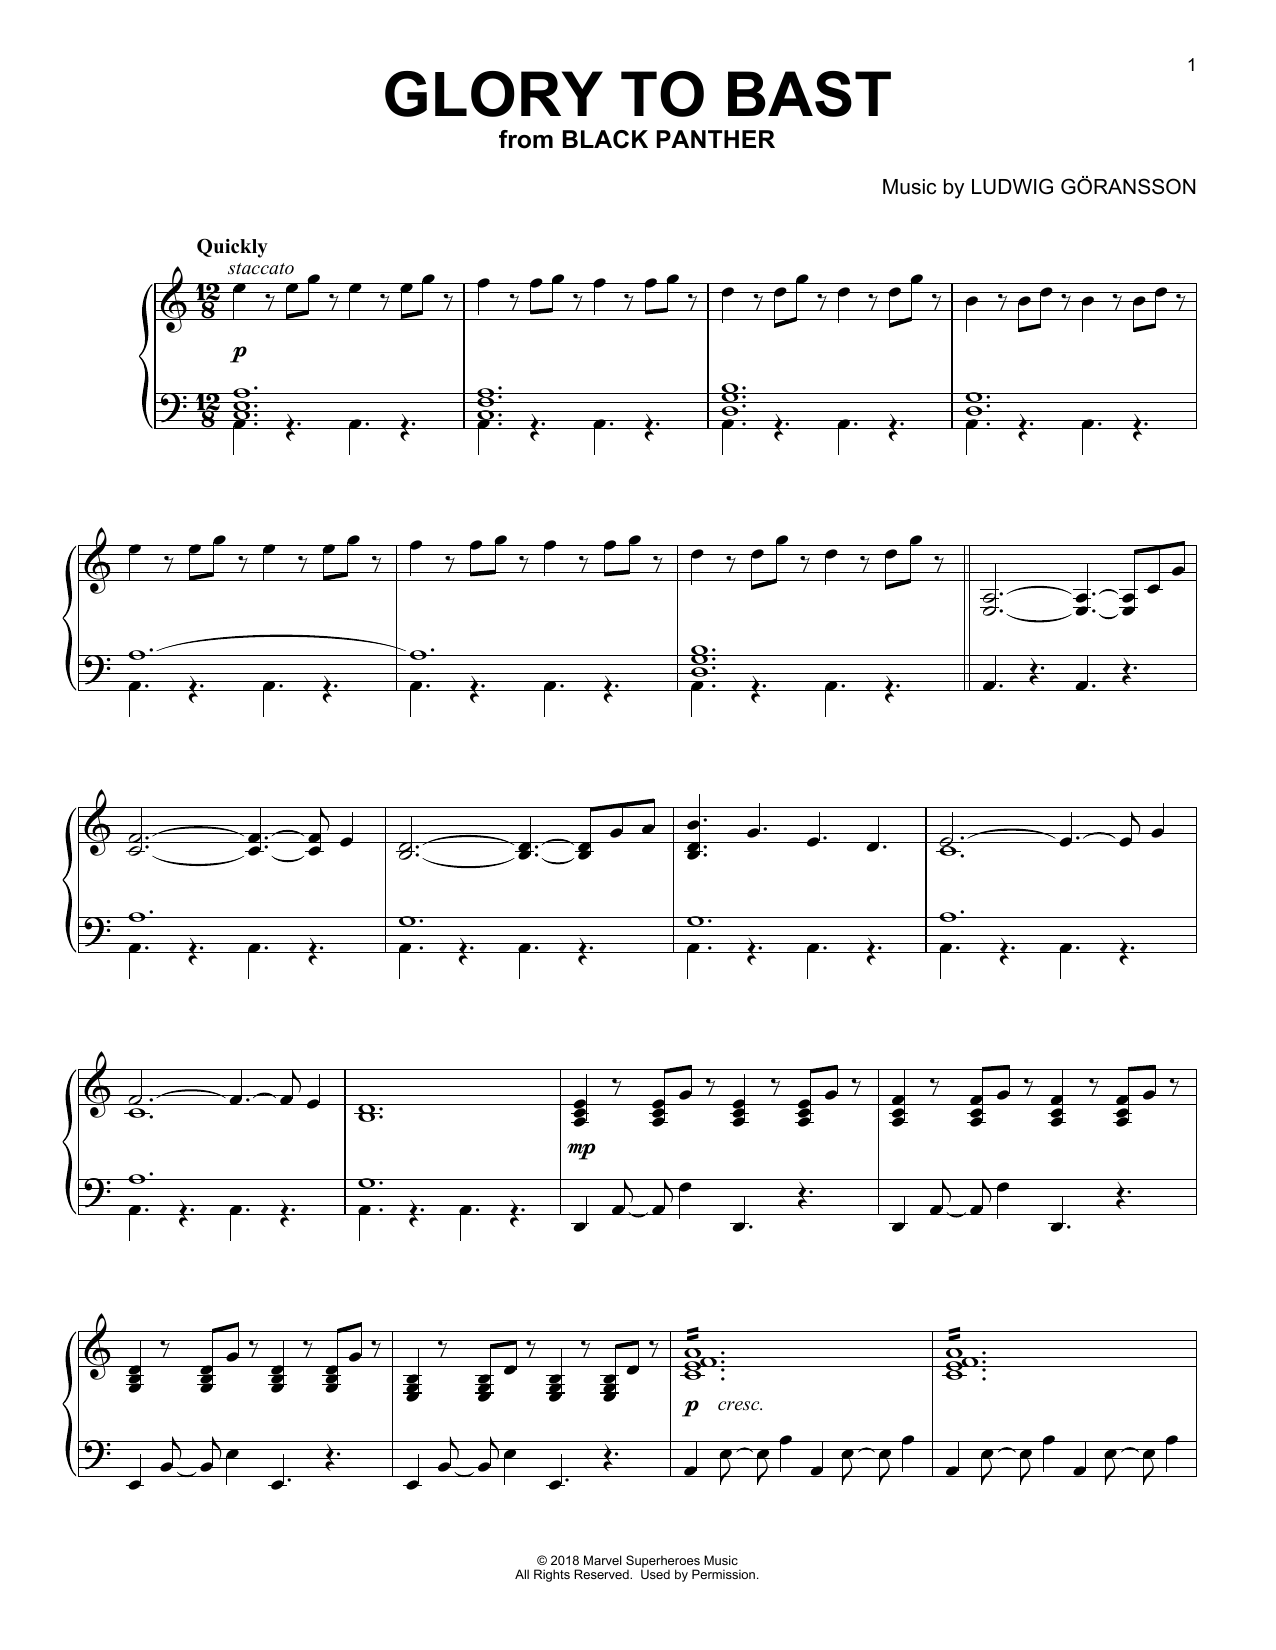 Download Ludwig Goransson Glory To Bast (from Black Panther) Sheet Music